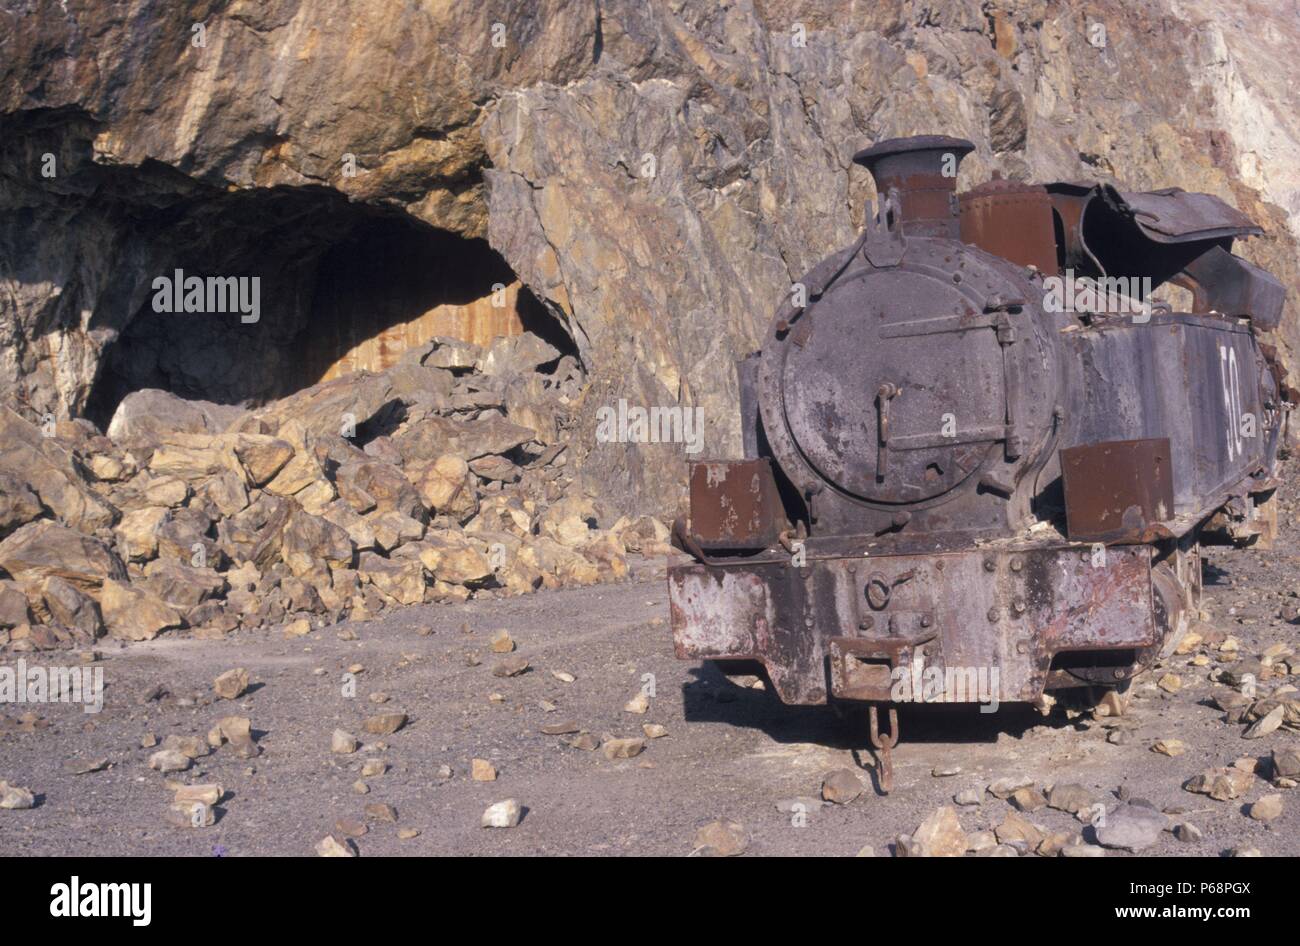 This Dubs 0-6-0T No. 1515 of 1881 is abandoned on a ledge in the big pit at Rio Tinto mines in southern Spain. Friday 8th May1987. Stock Photo